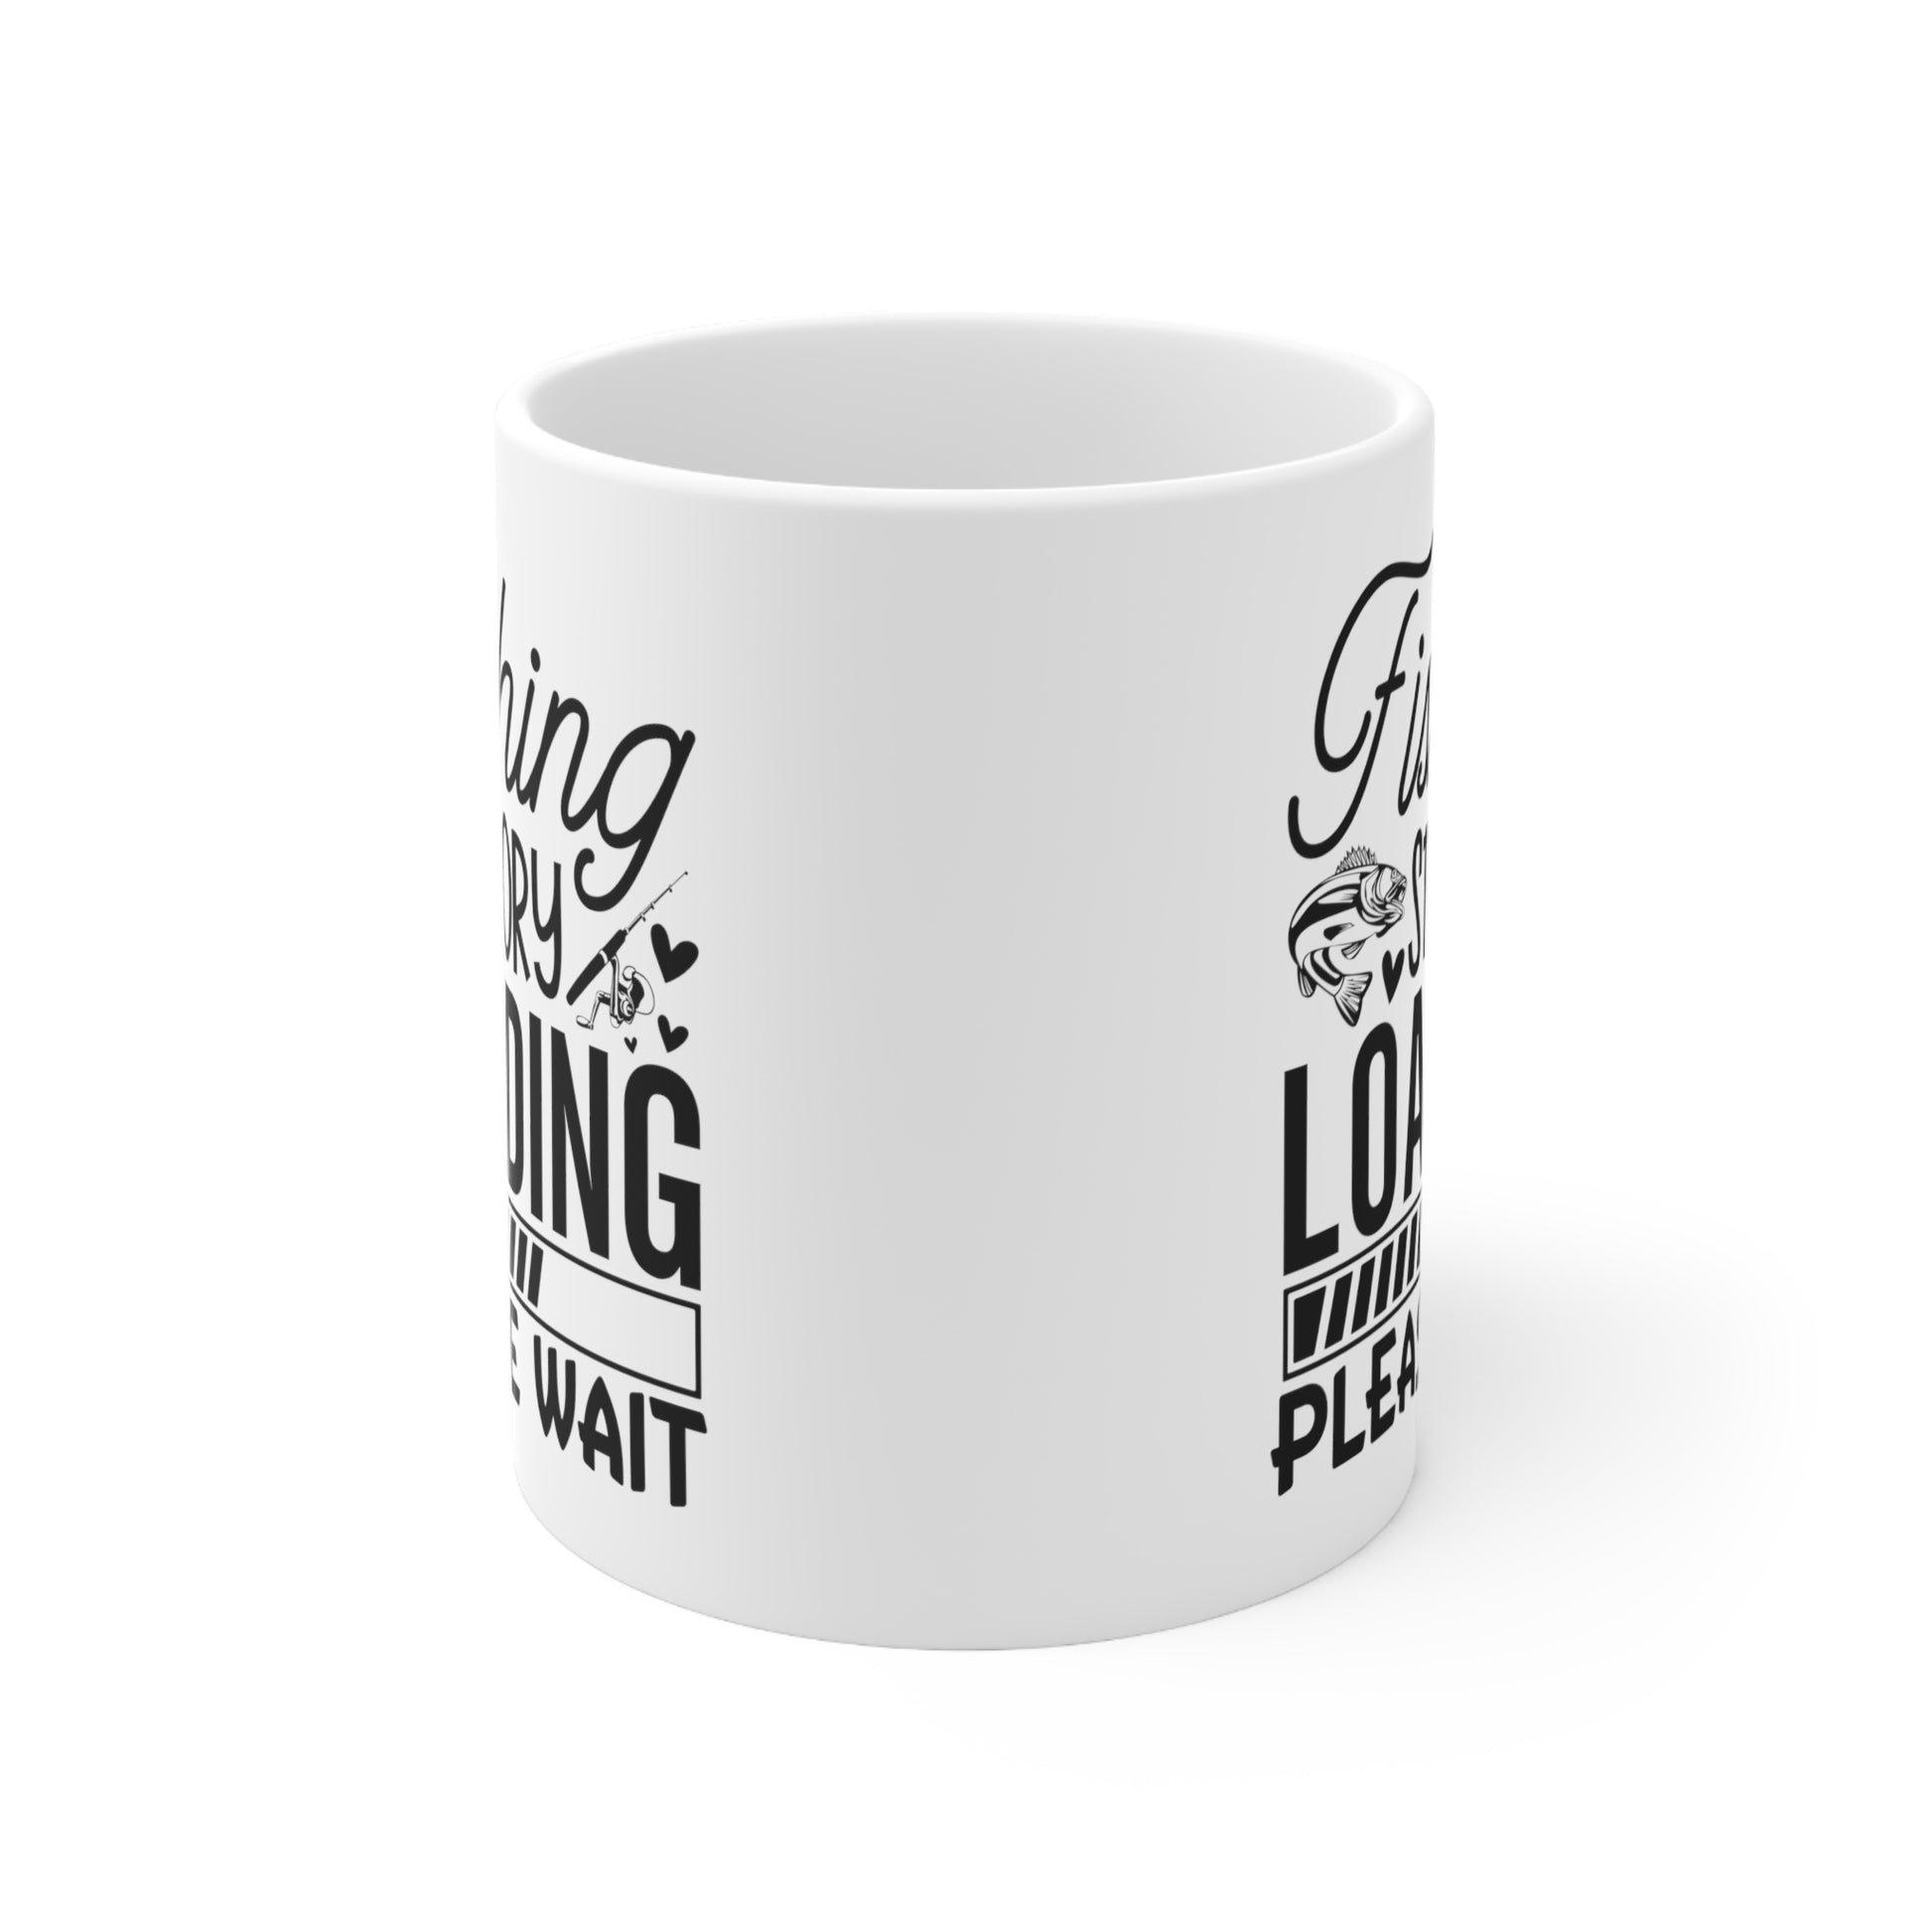 "Fishing Story Loading....Please Wait" Coffee Mug - Weave Got Gifts - Unique Gifts You Won’t Find Anywhere Else!